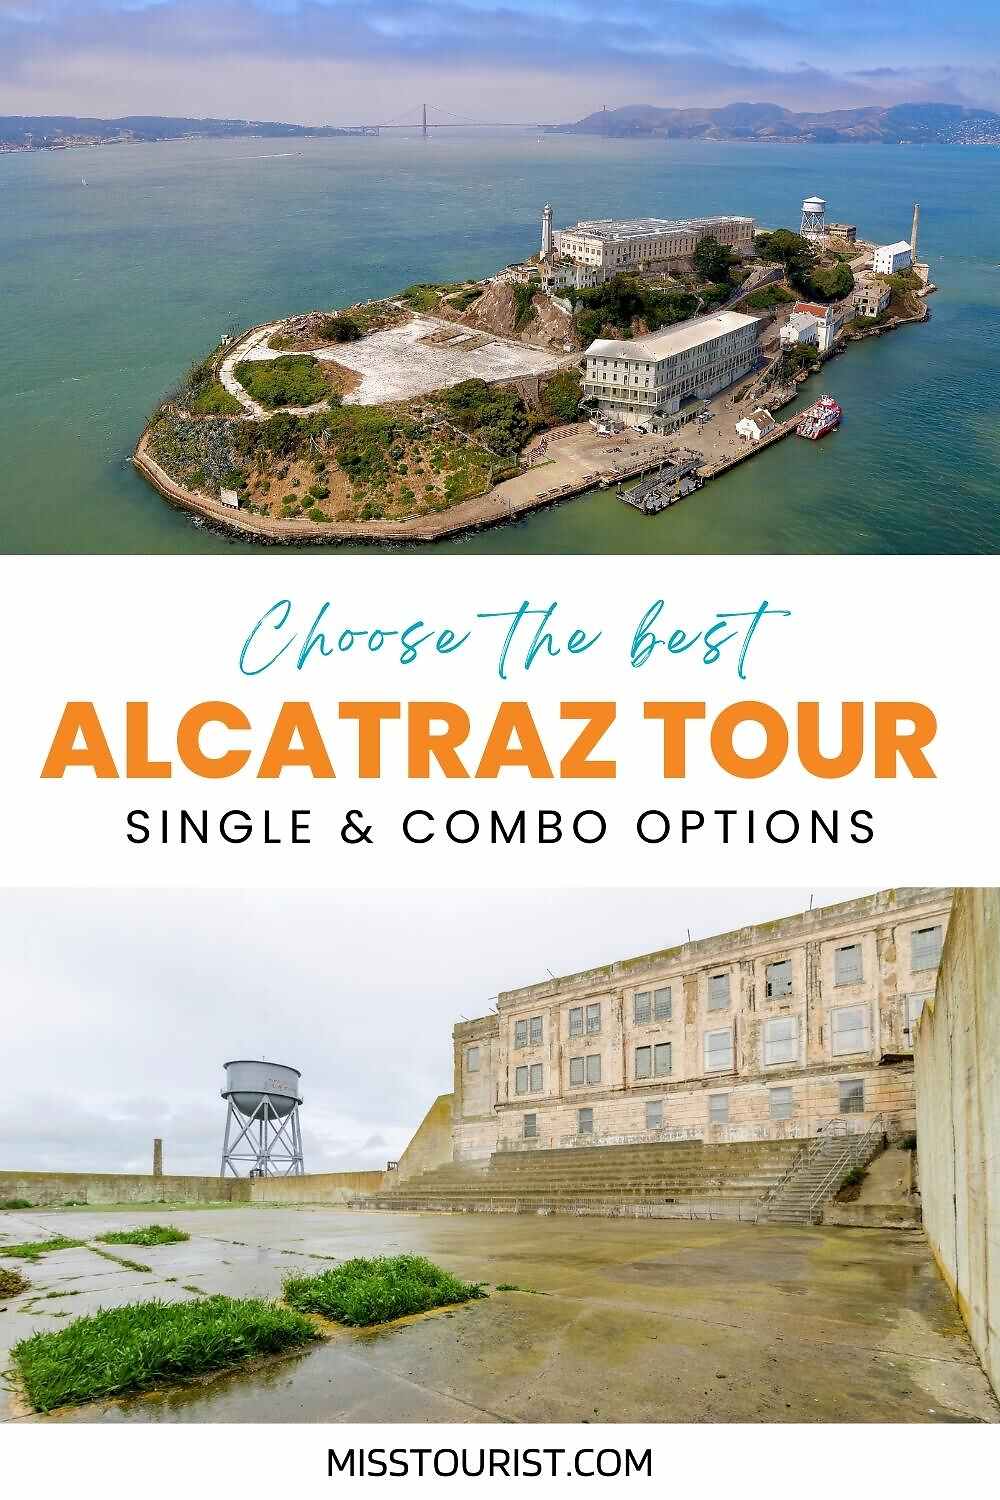 collage with aerial view and landscape - Alcatraz Island